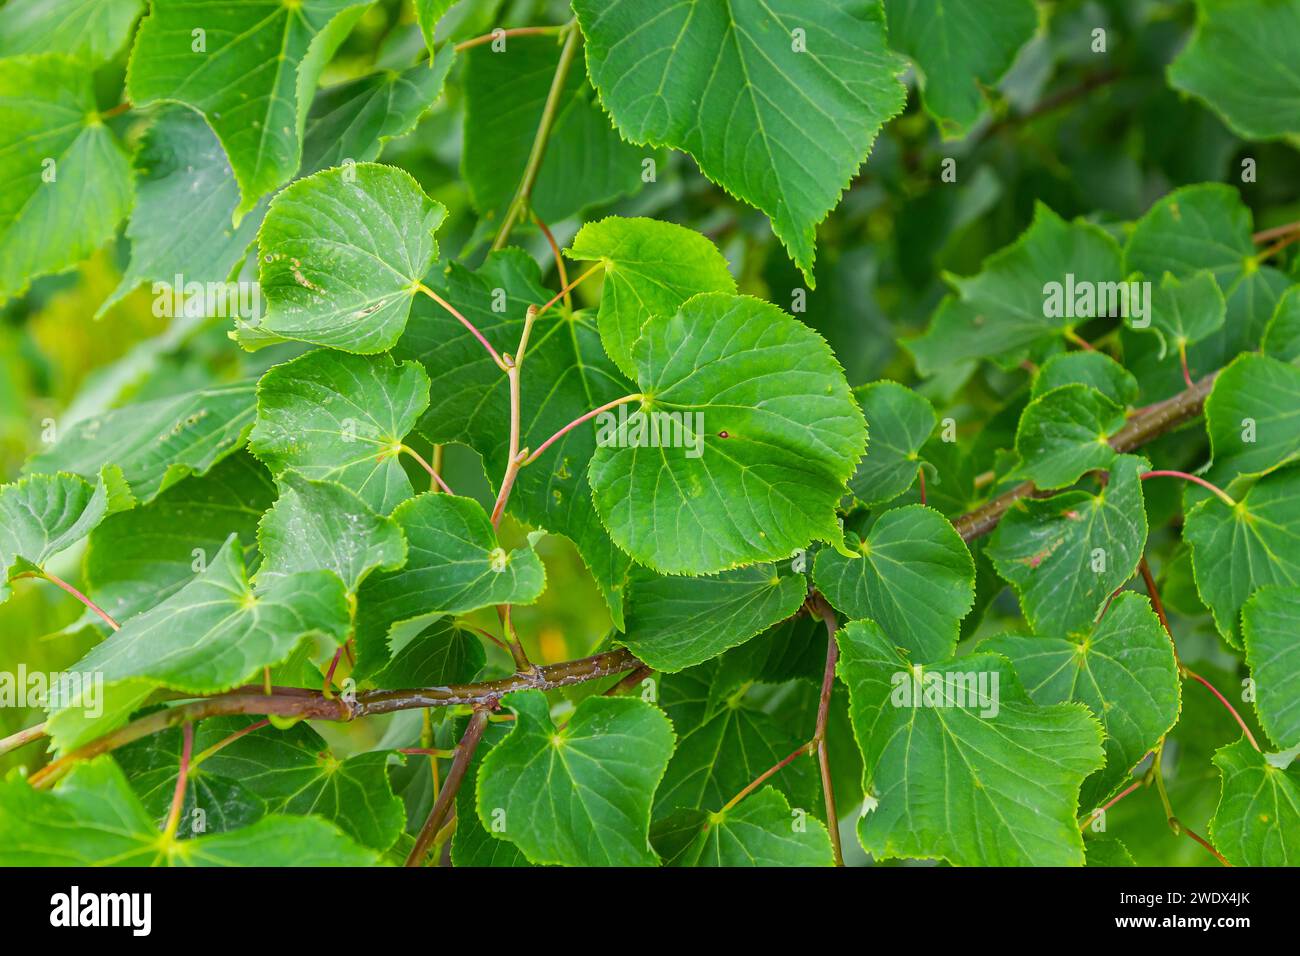 Tilia cordata leaves and fruits growing on tree branches. Stock Photo